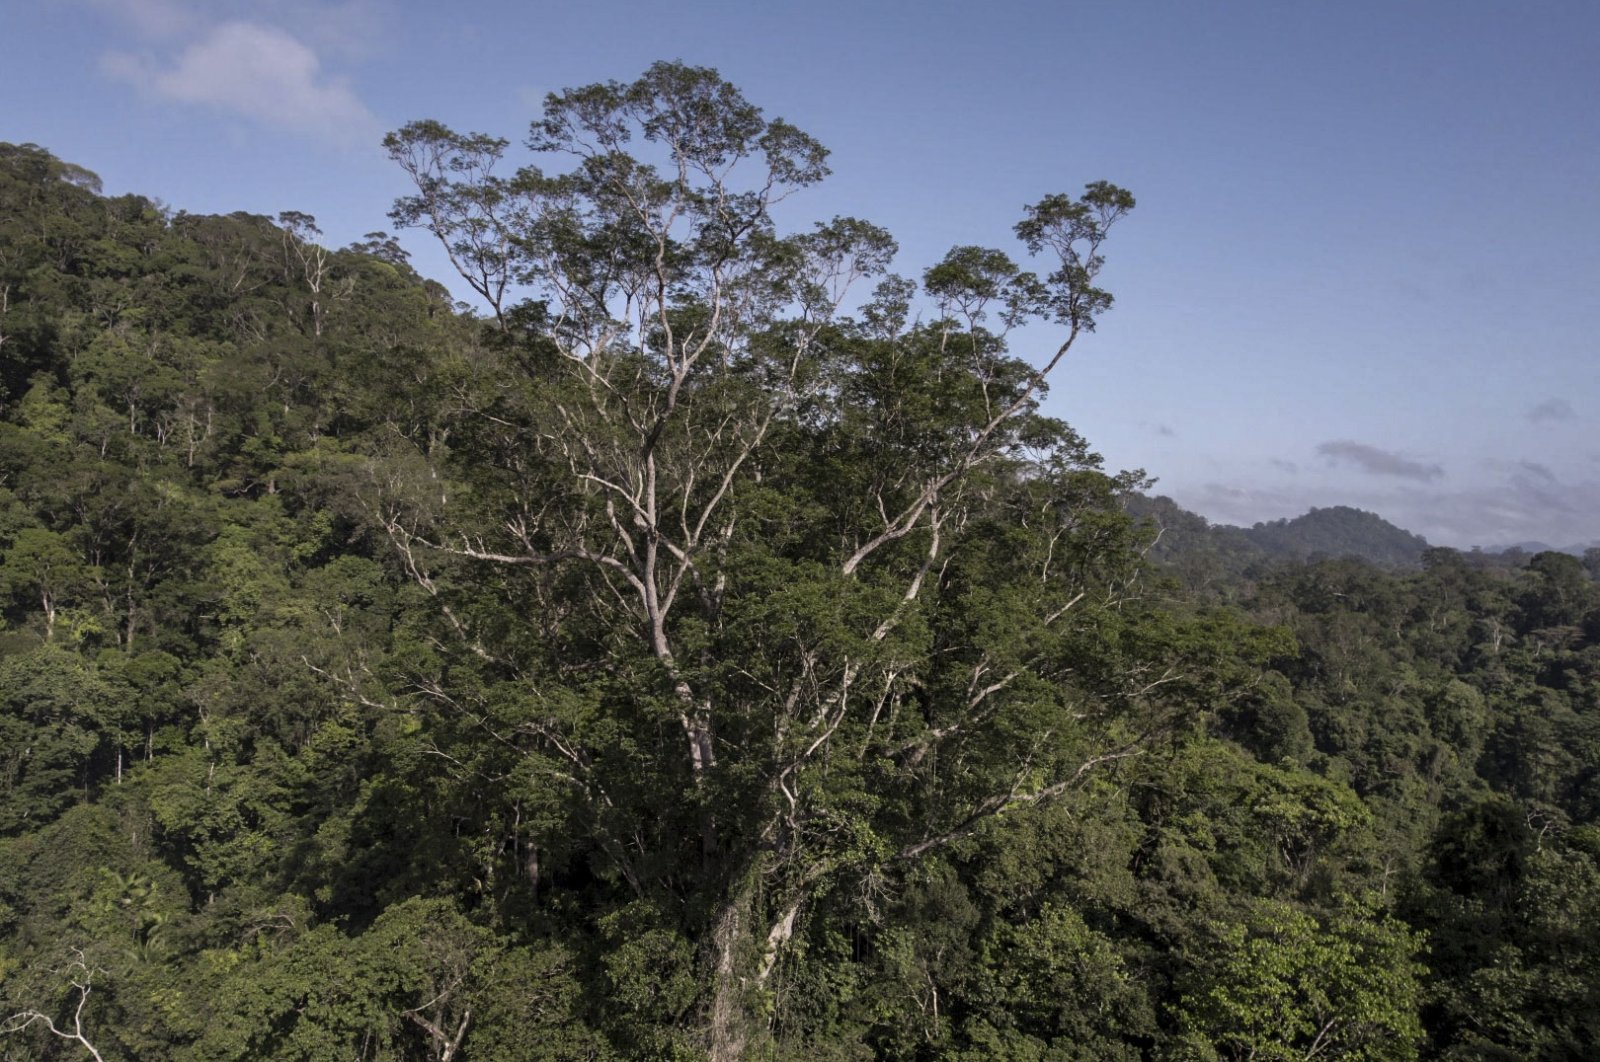 An Angelim Vermelho tree (Dinizia Excelsa Ducke), the highest tree found in the Amazon rainforest, located in the region of Jari River, at the border of Amapa and Para states, north of Brazil, Sept. 17, 2022. (Havita Rigamonti via AFP)